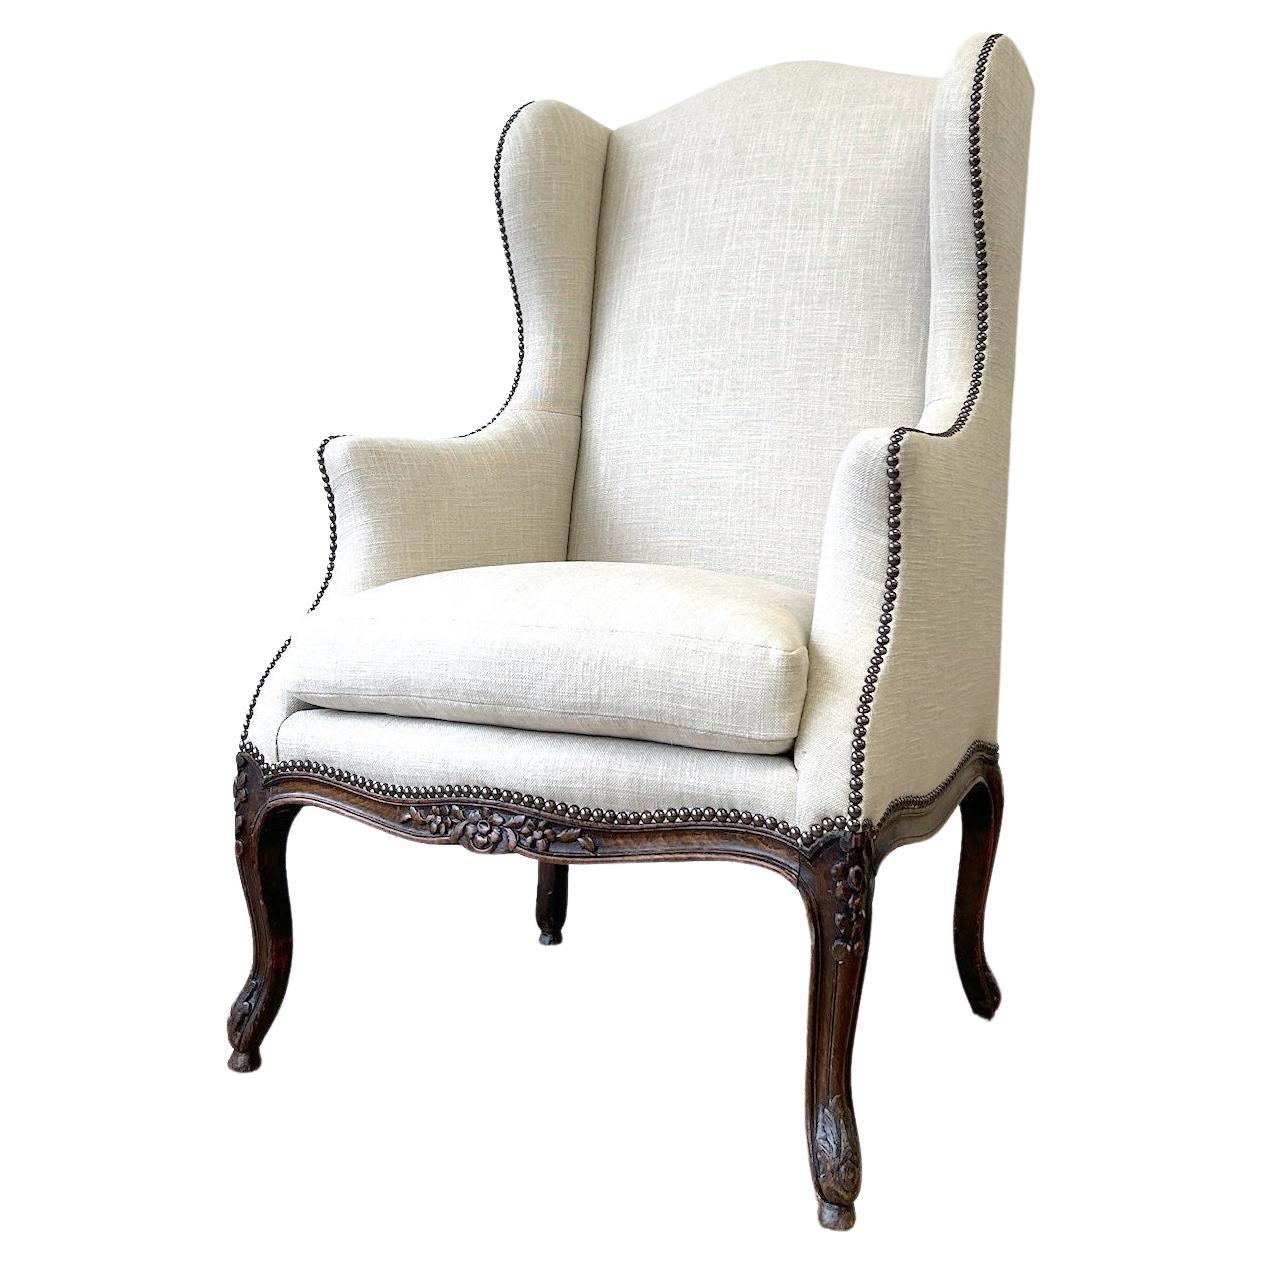 An Antique French Arm Chair with New Kravet Linen Upholstery